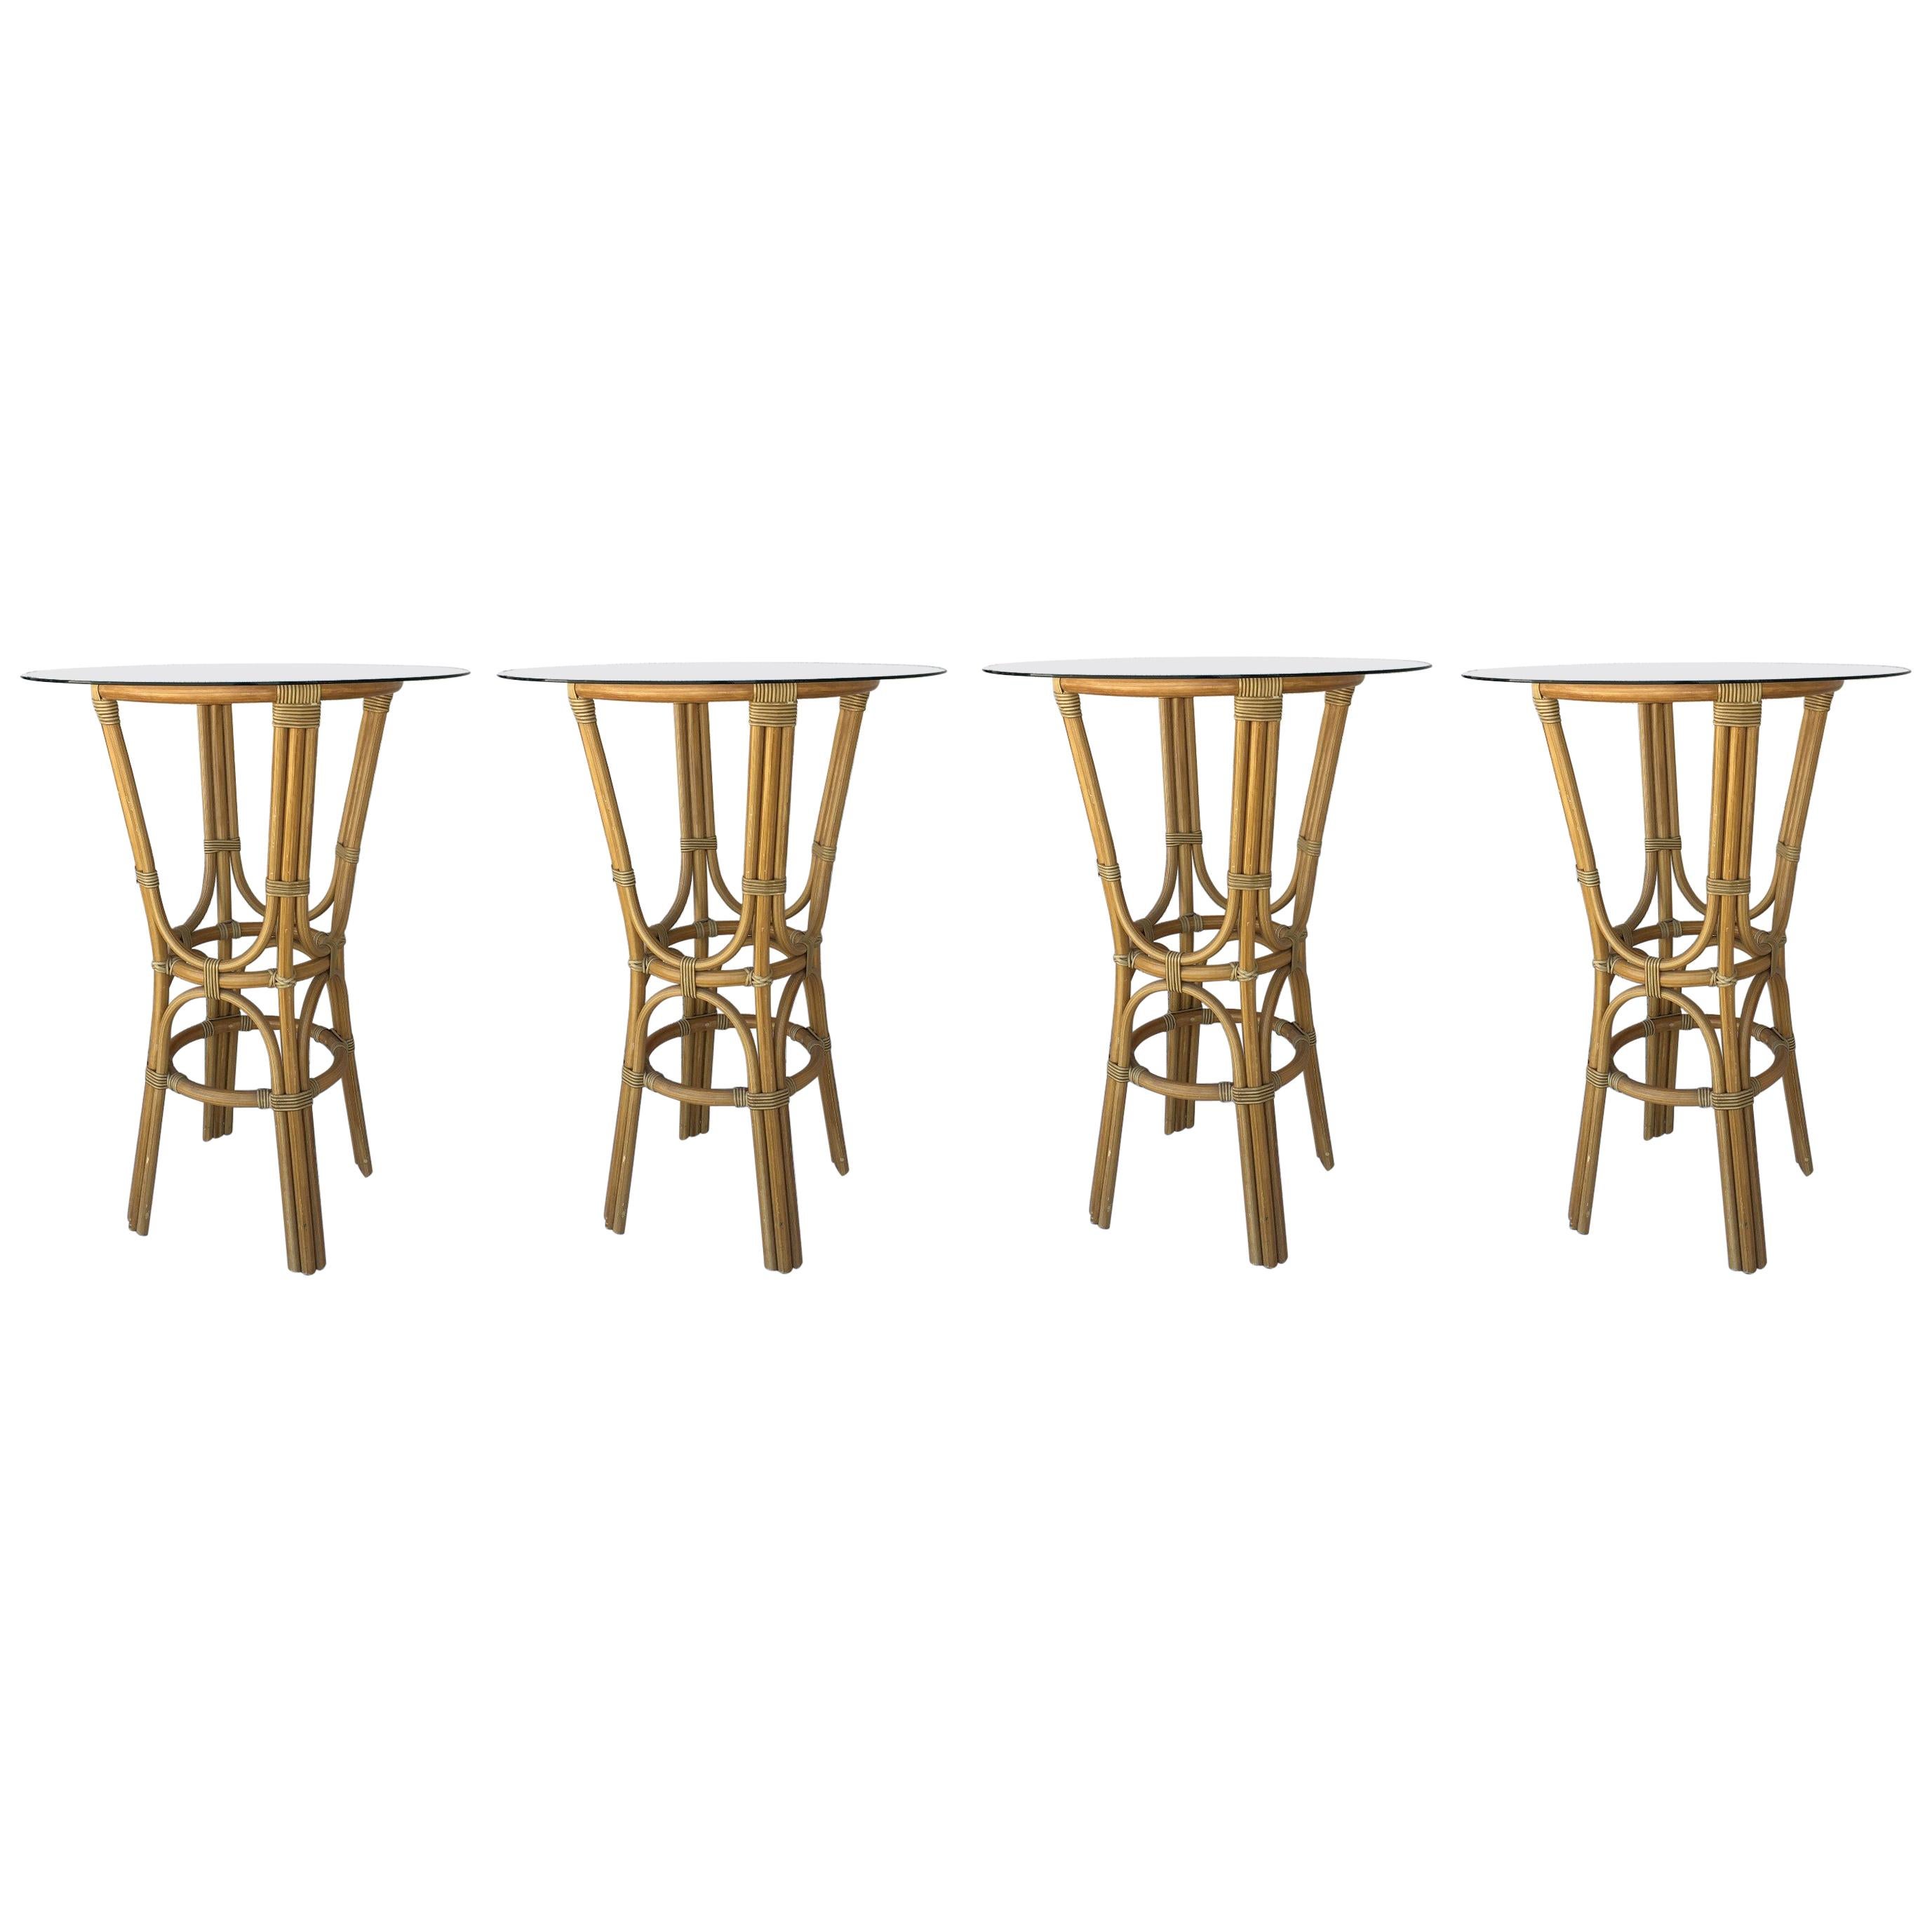 20th Century Set of Four High Round Cocktail Table in Faux Bamboo with Glass Top